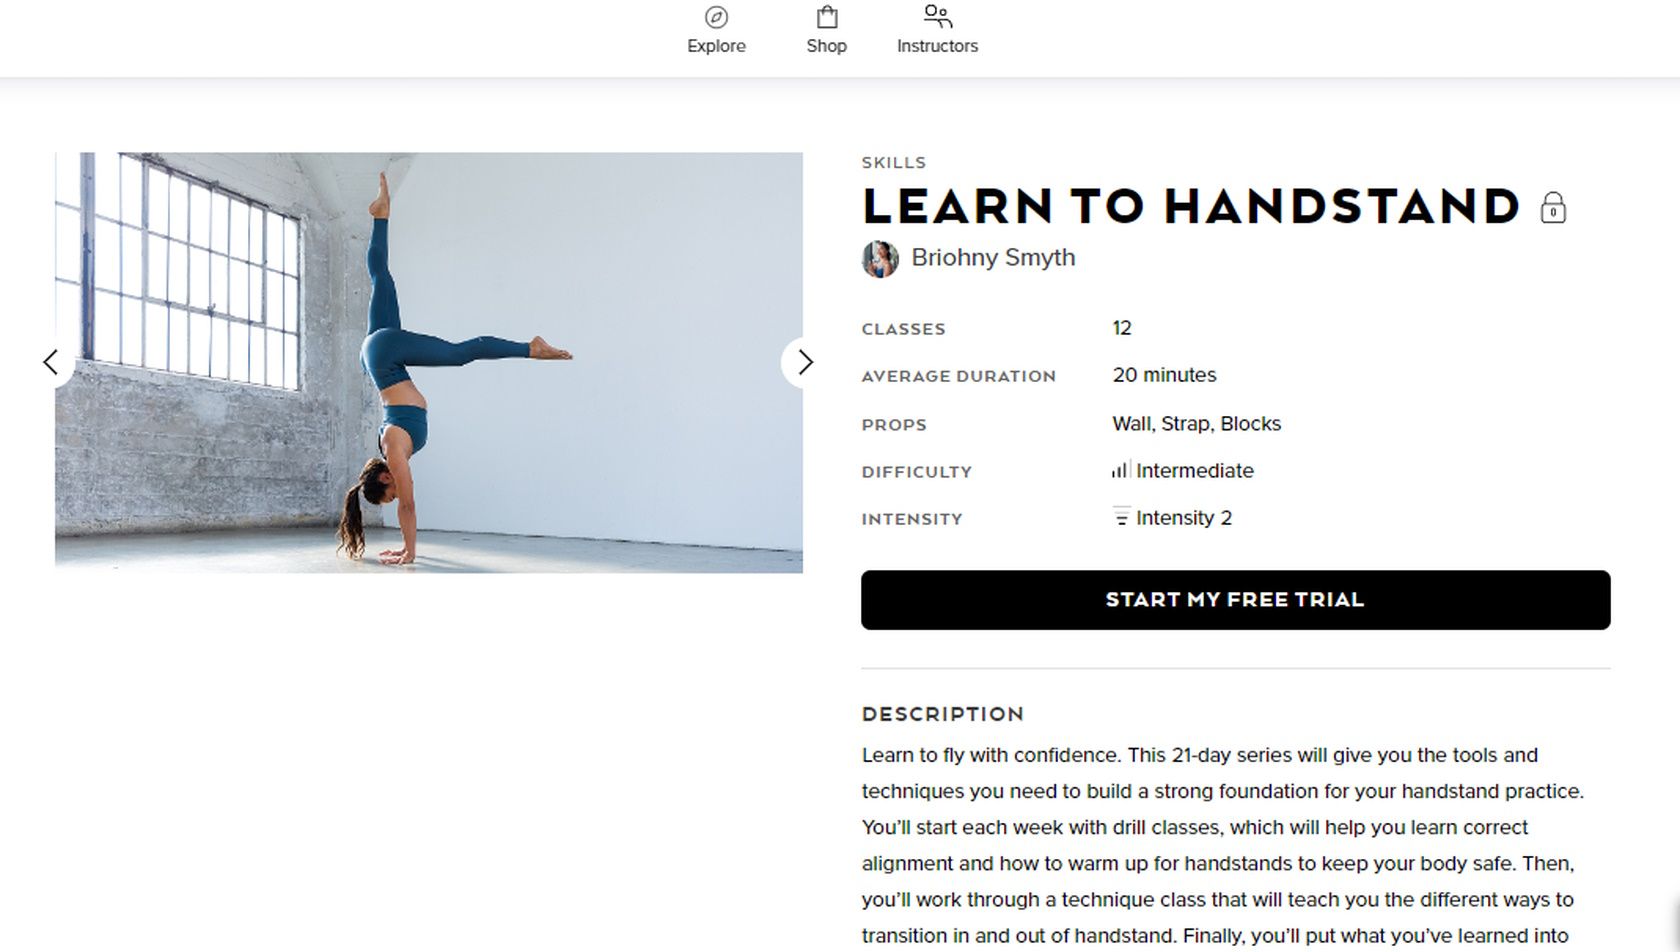 Alo moves learn to handstand series